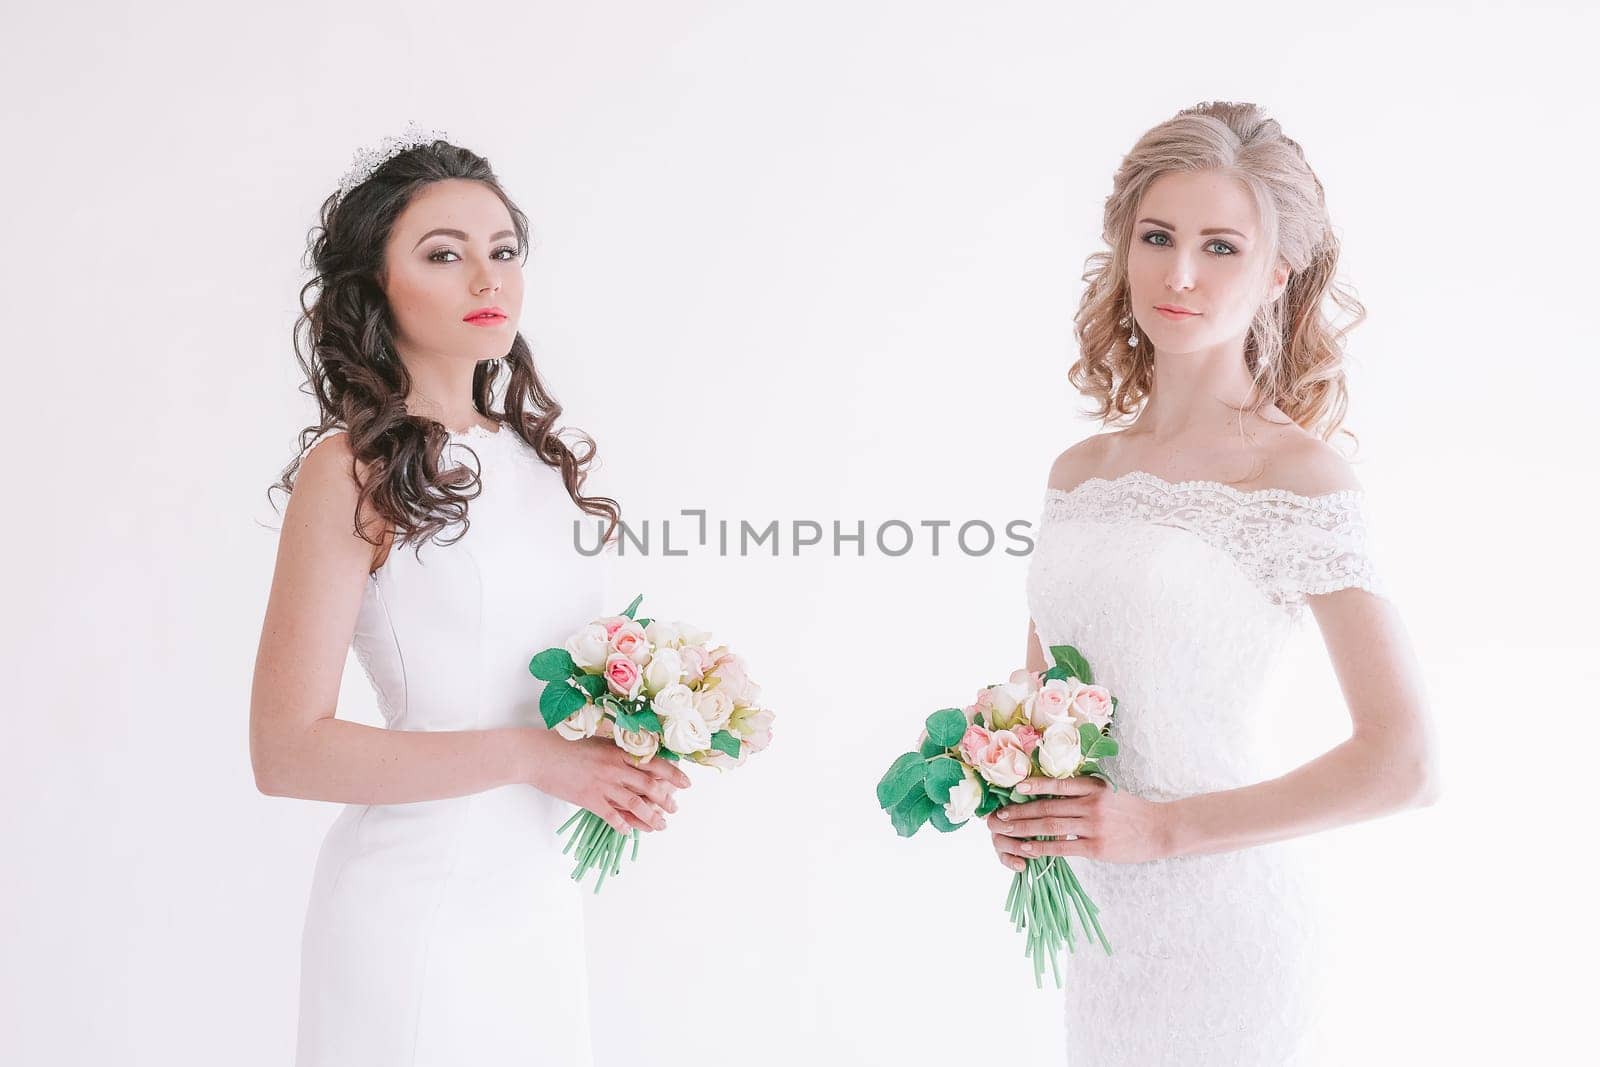 two wedding bride with bouquet wedding white by Simakov